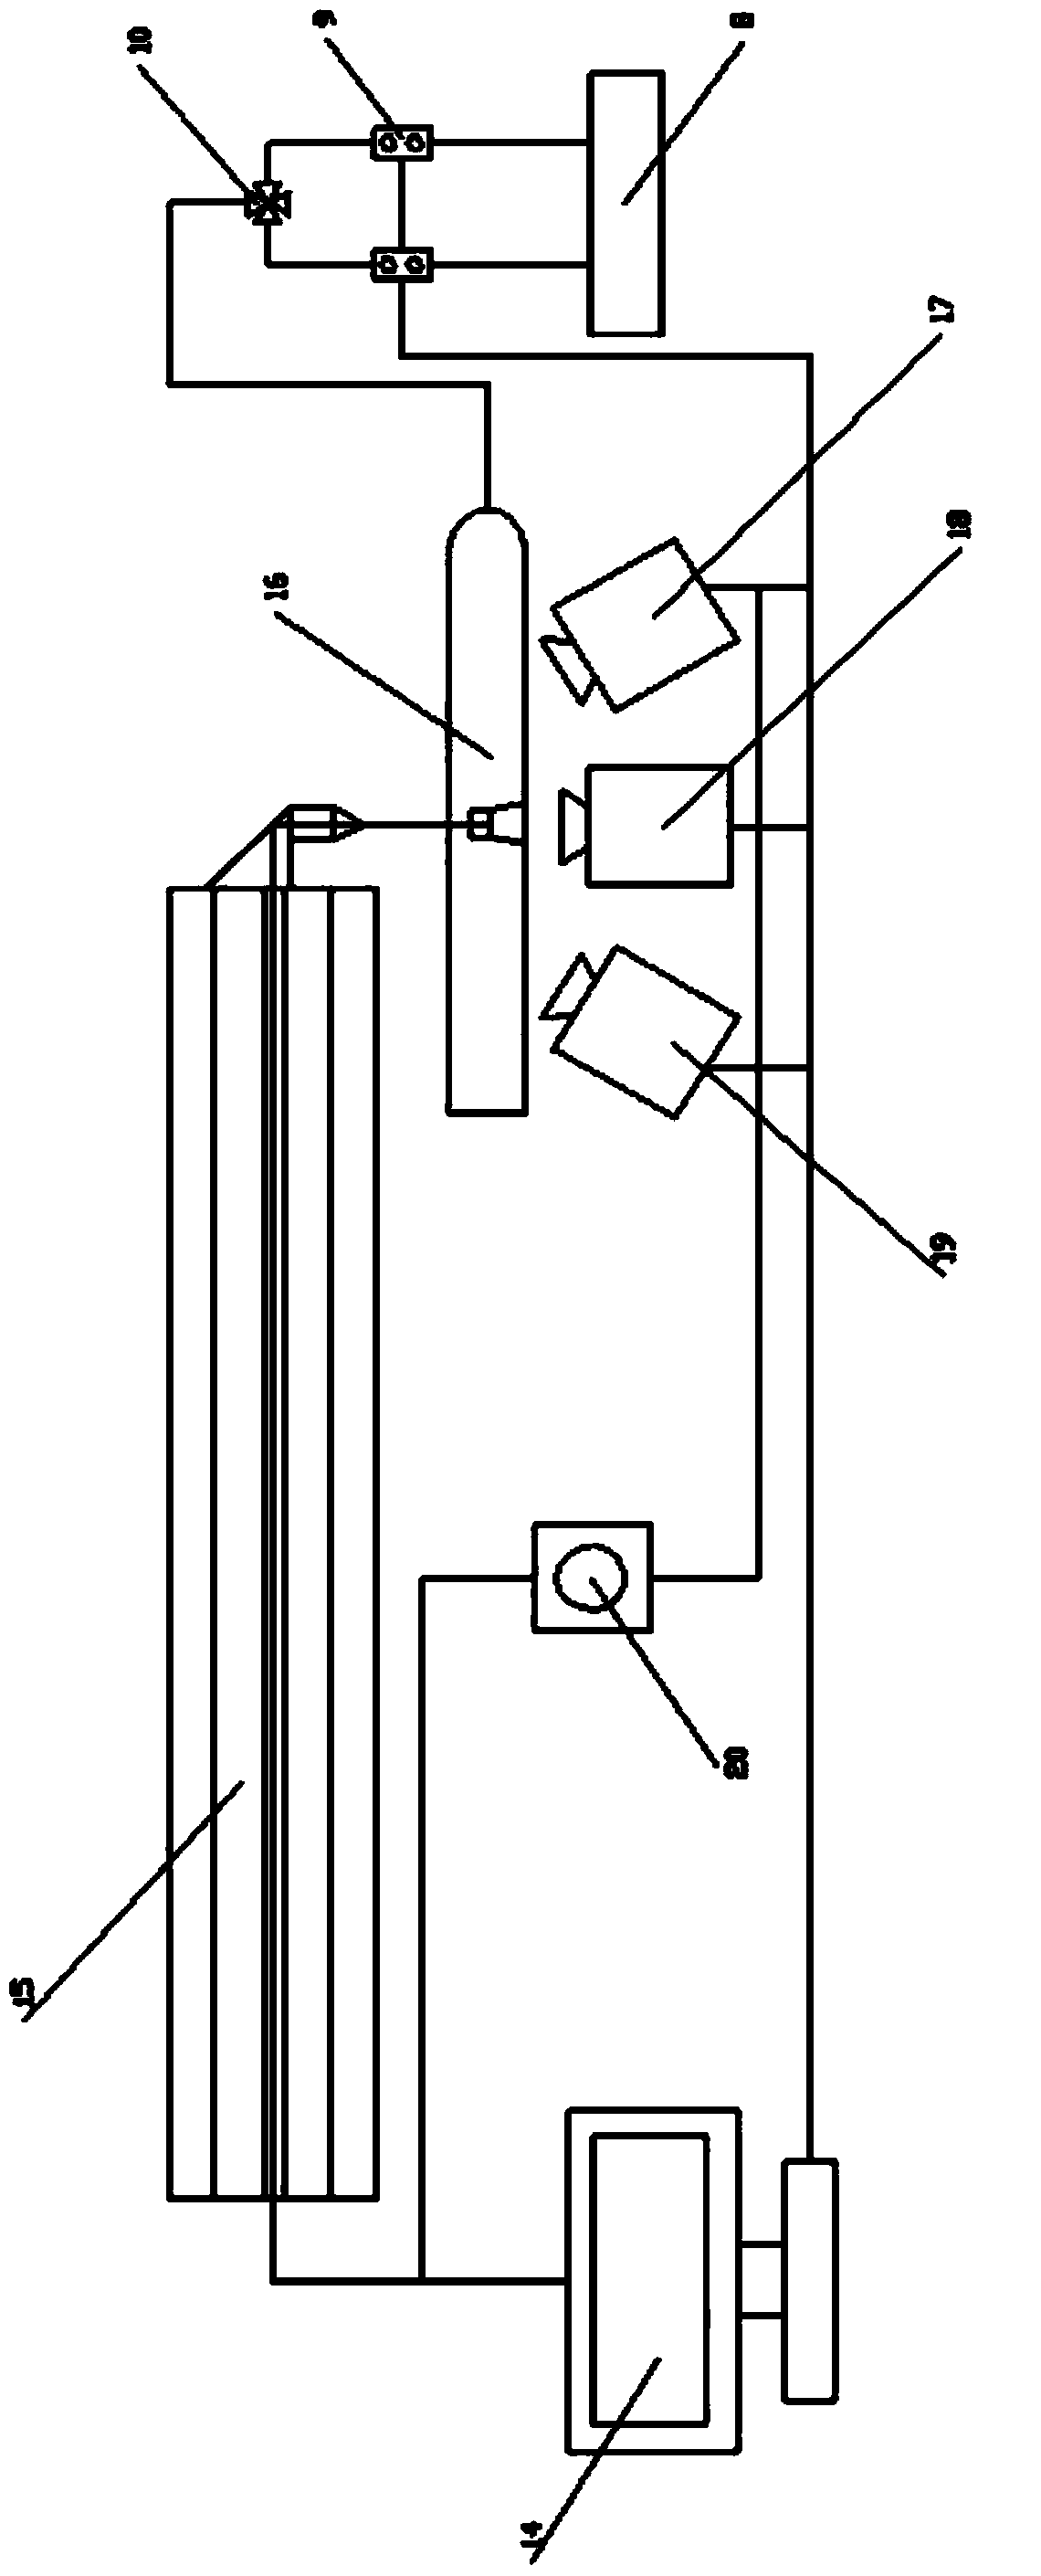 Device for ignition and combustion of primary boron product with high energy density laser